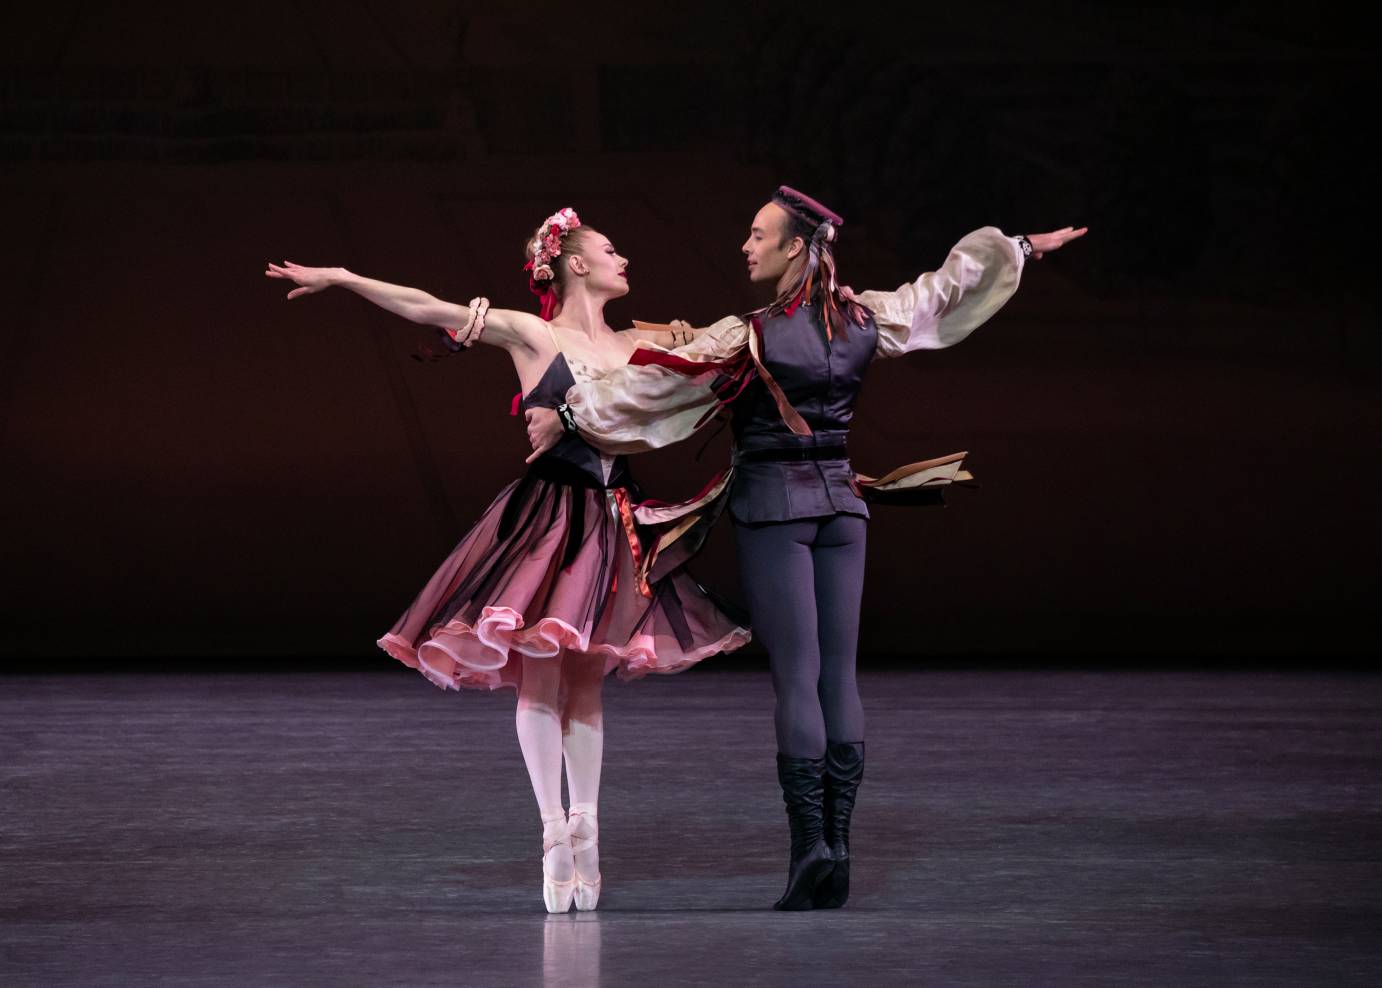 Two dancers in folk costumes hold each other's bodies with one arm; the other is extended